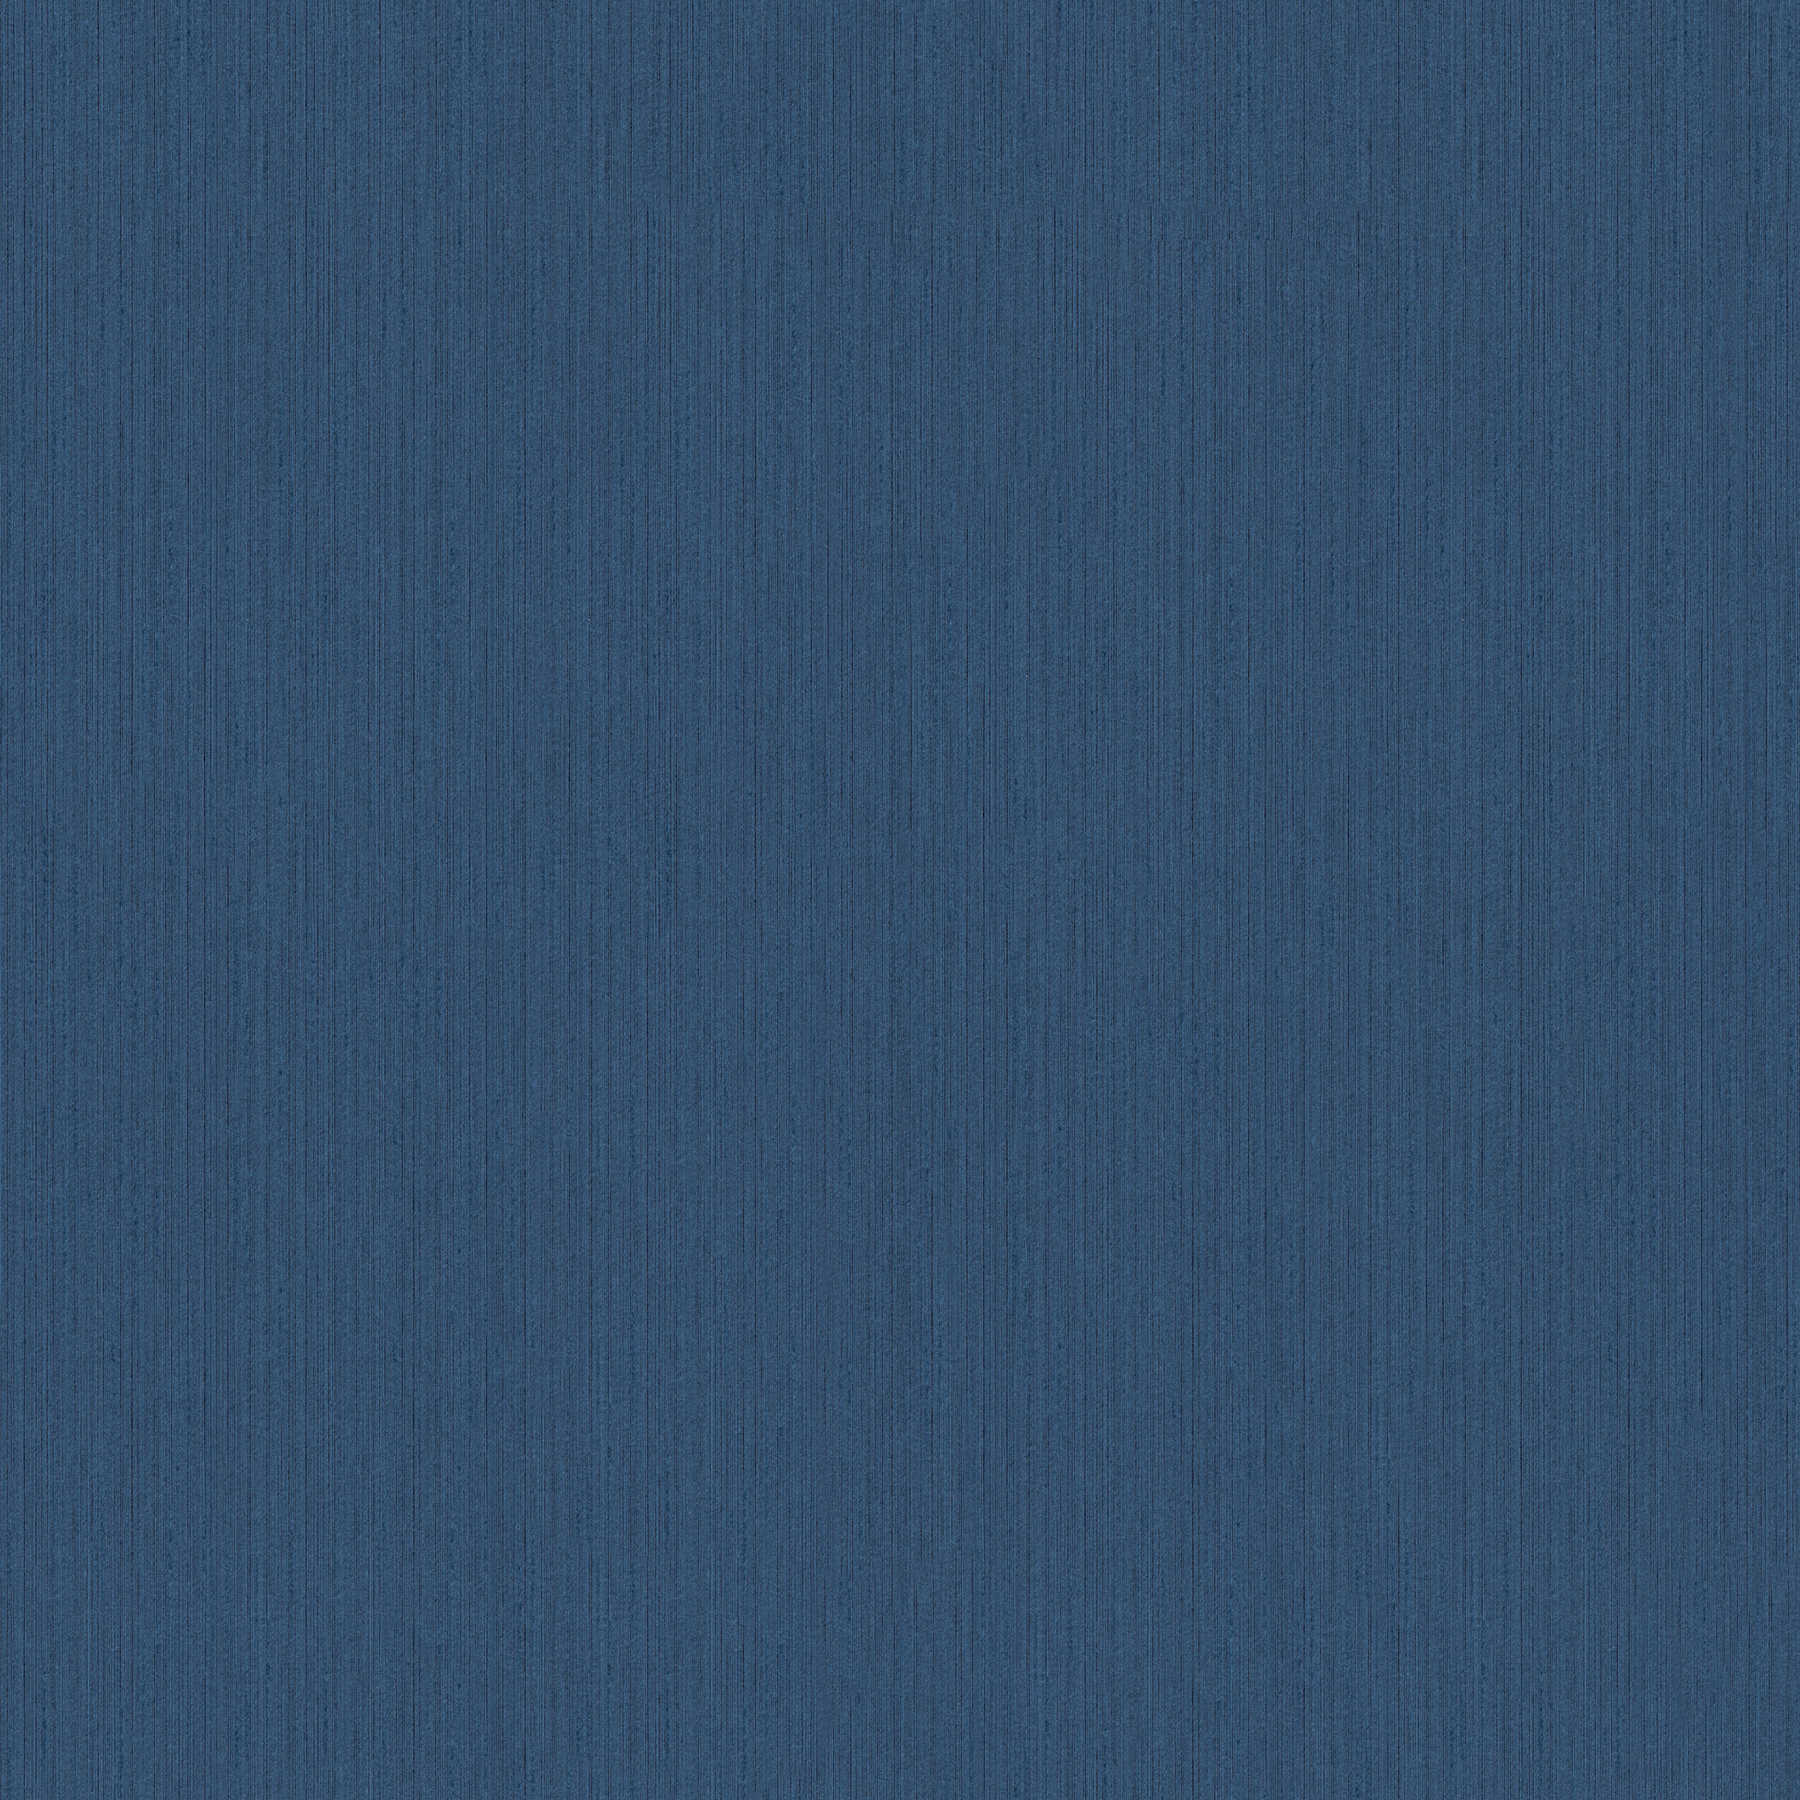         Plain non-woven wallpaper with lined structure pattern - blue
    